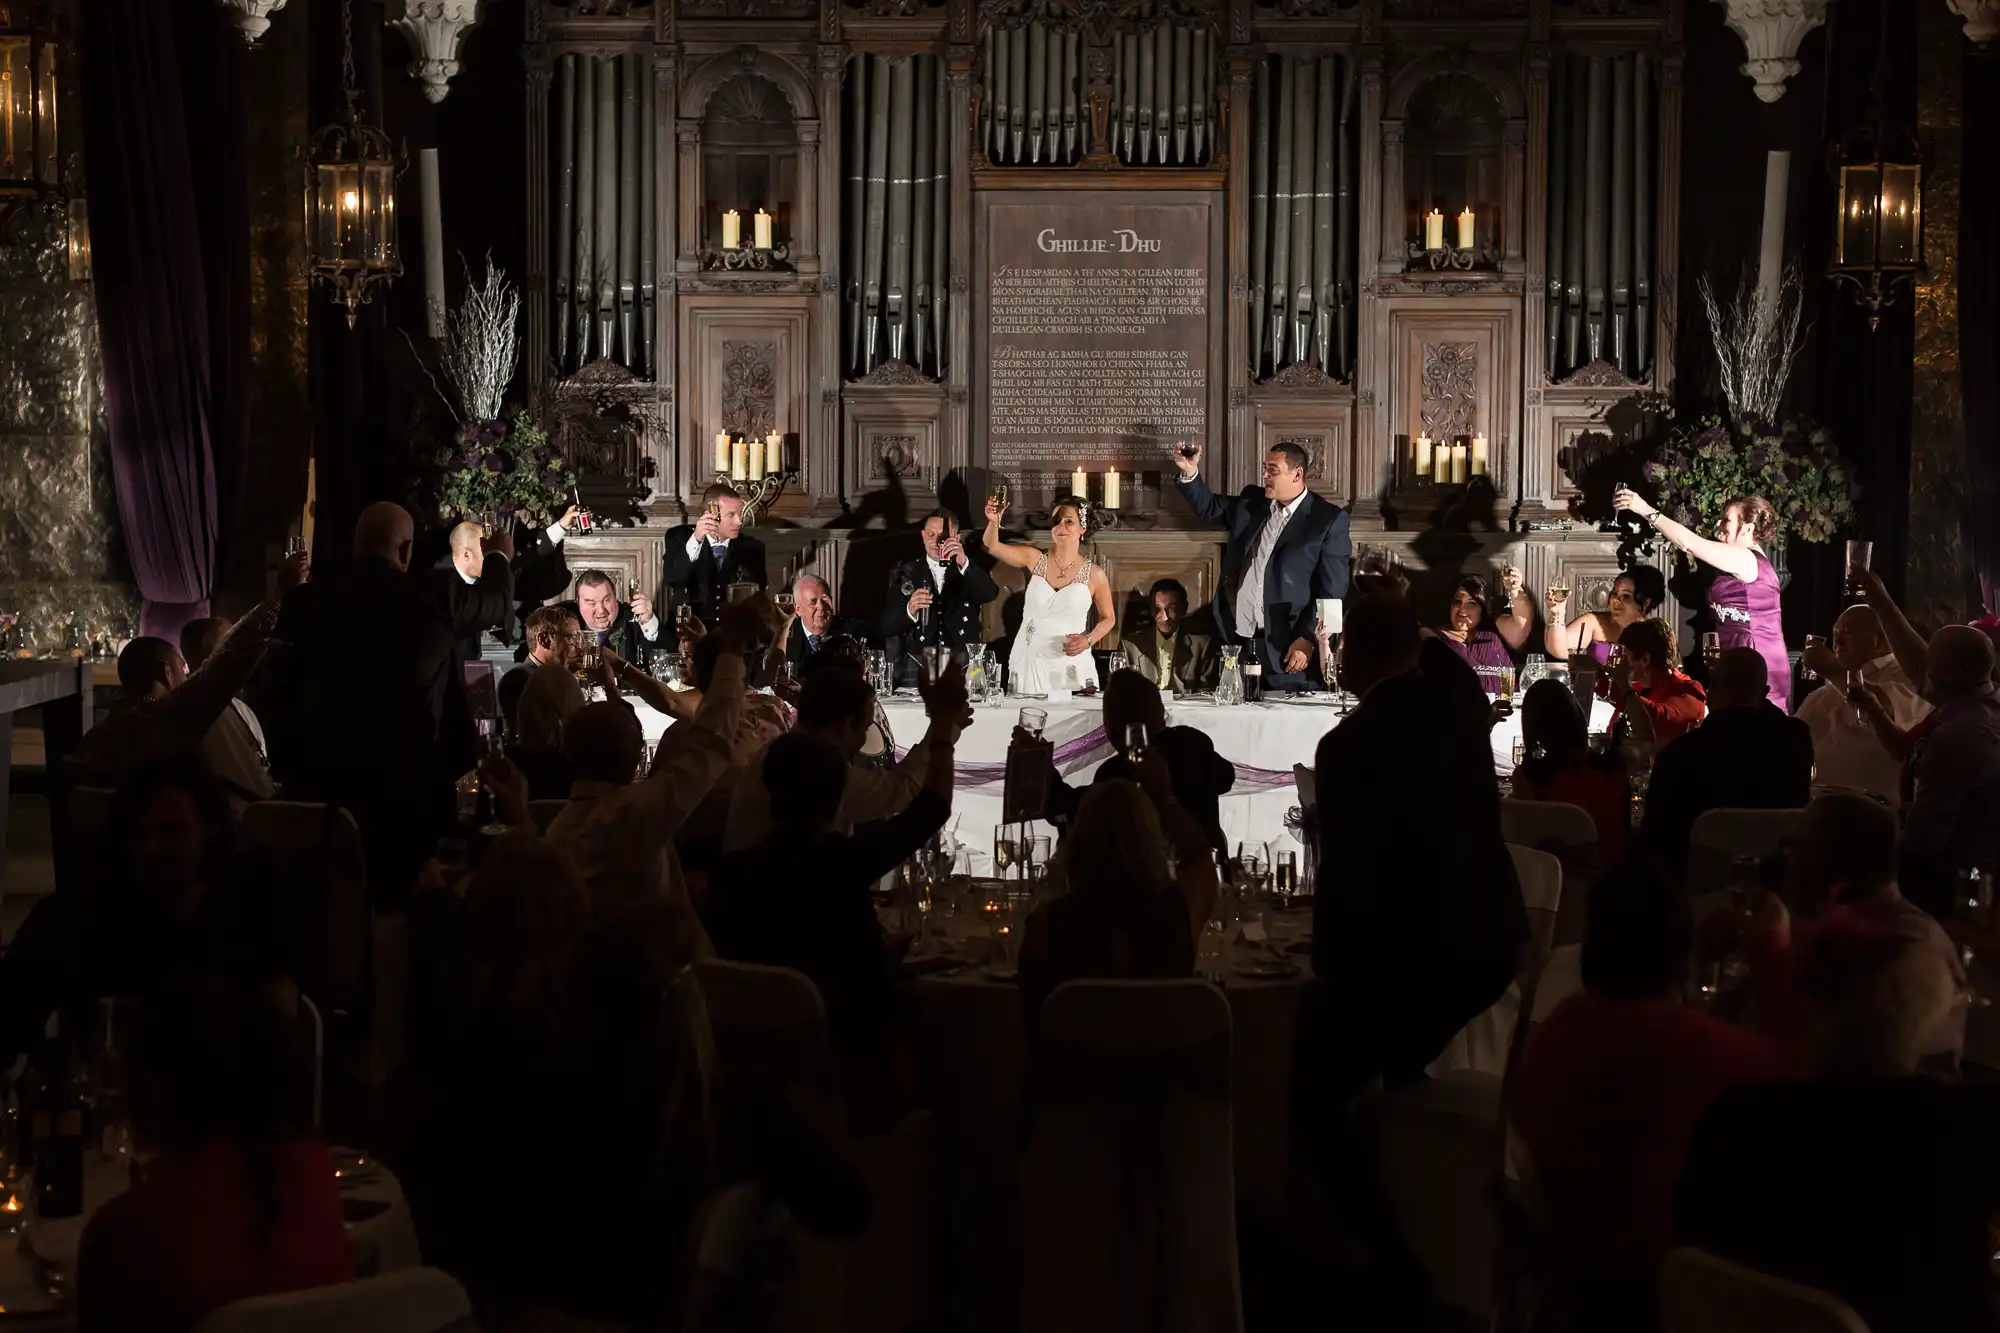 A bride and groom dancing on a table at an elegant, dimly lit wedding reception surrounded by cheering guests.